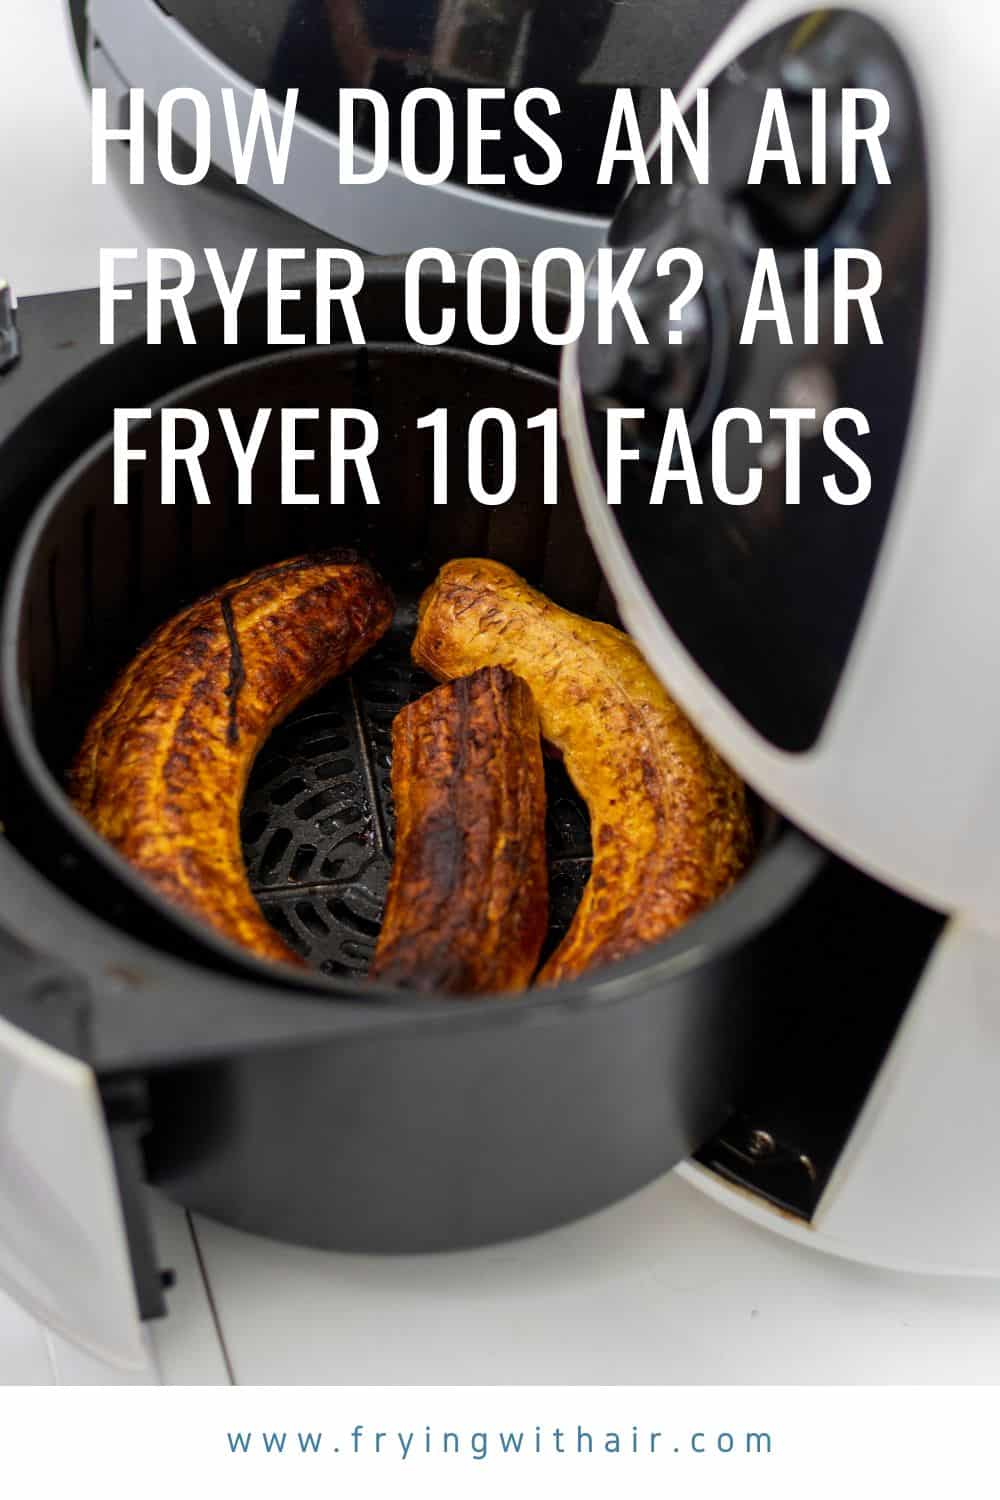 How does an air fryer cook (1)